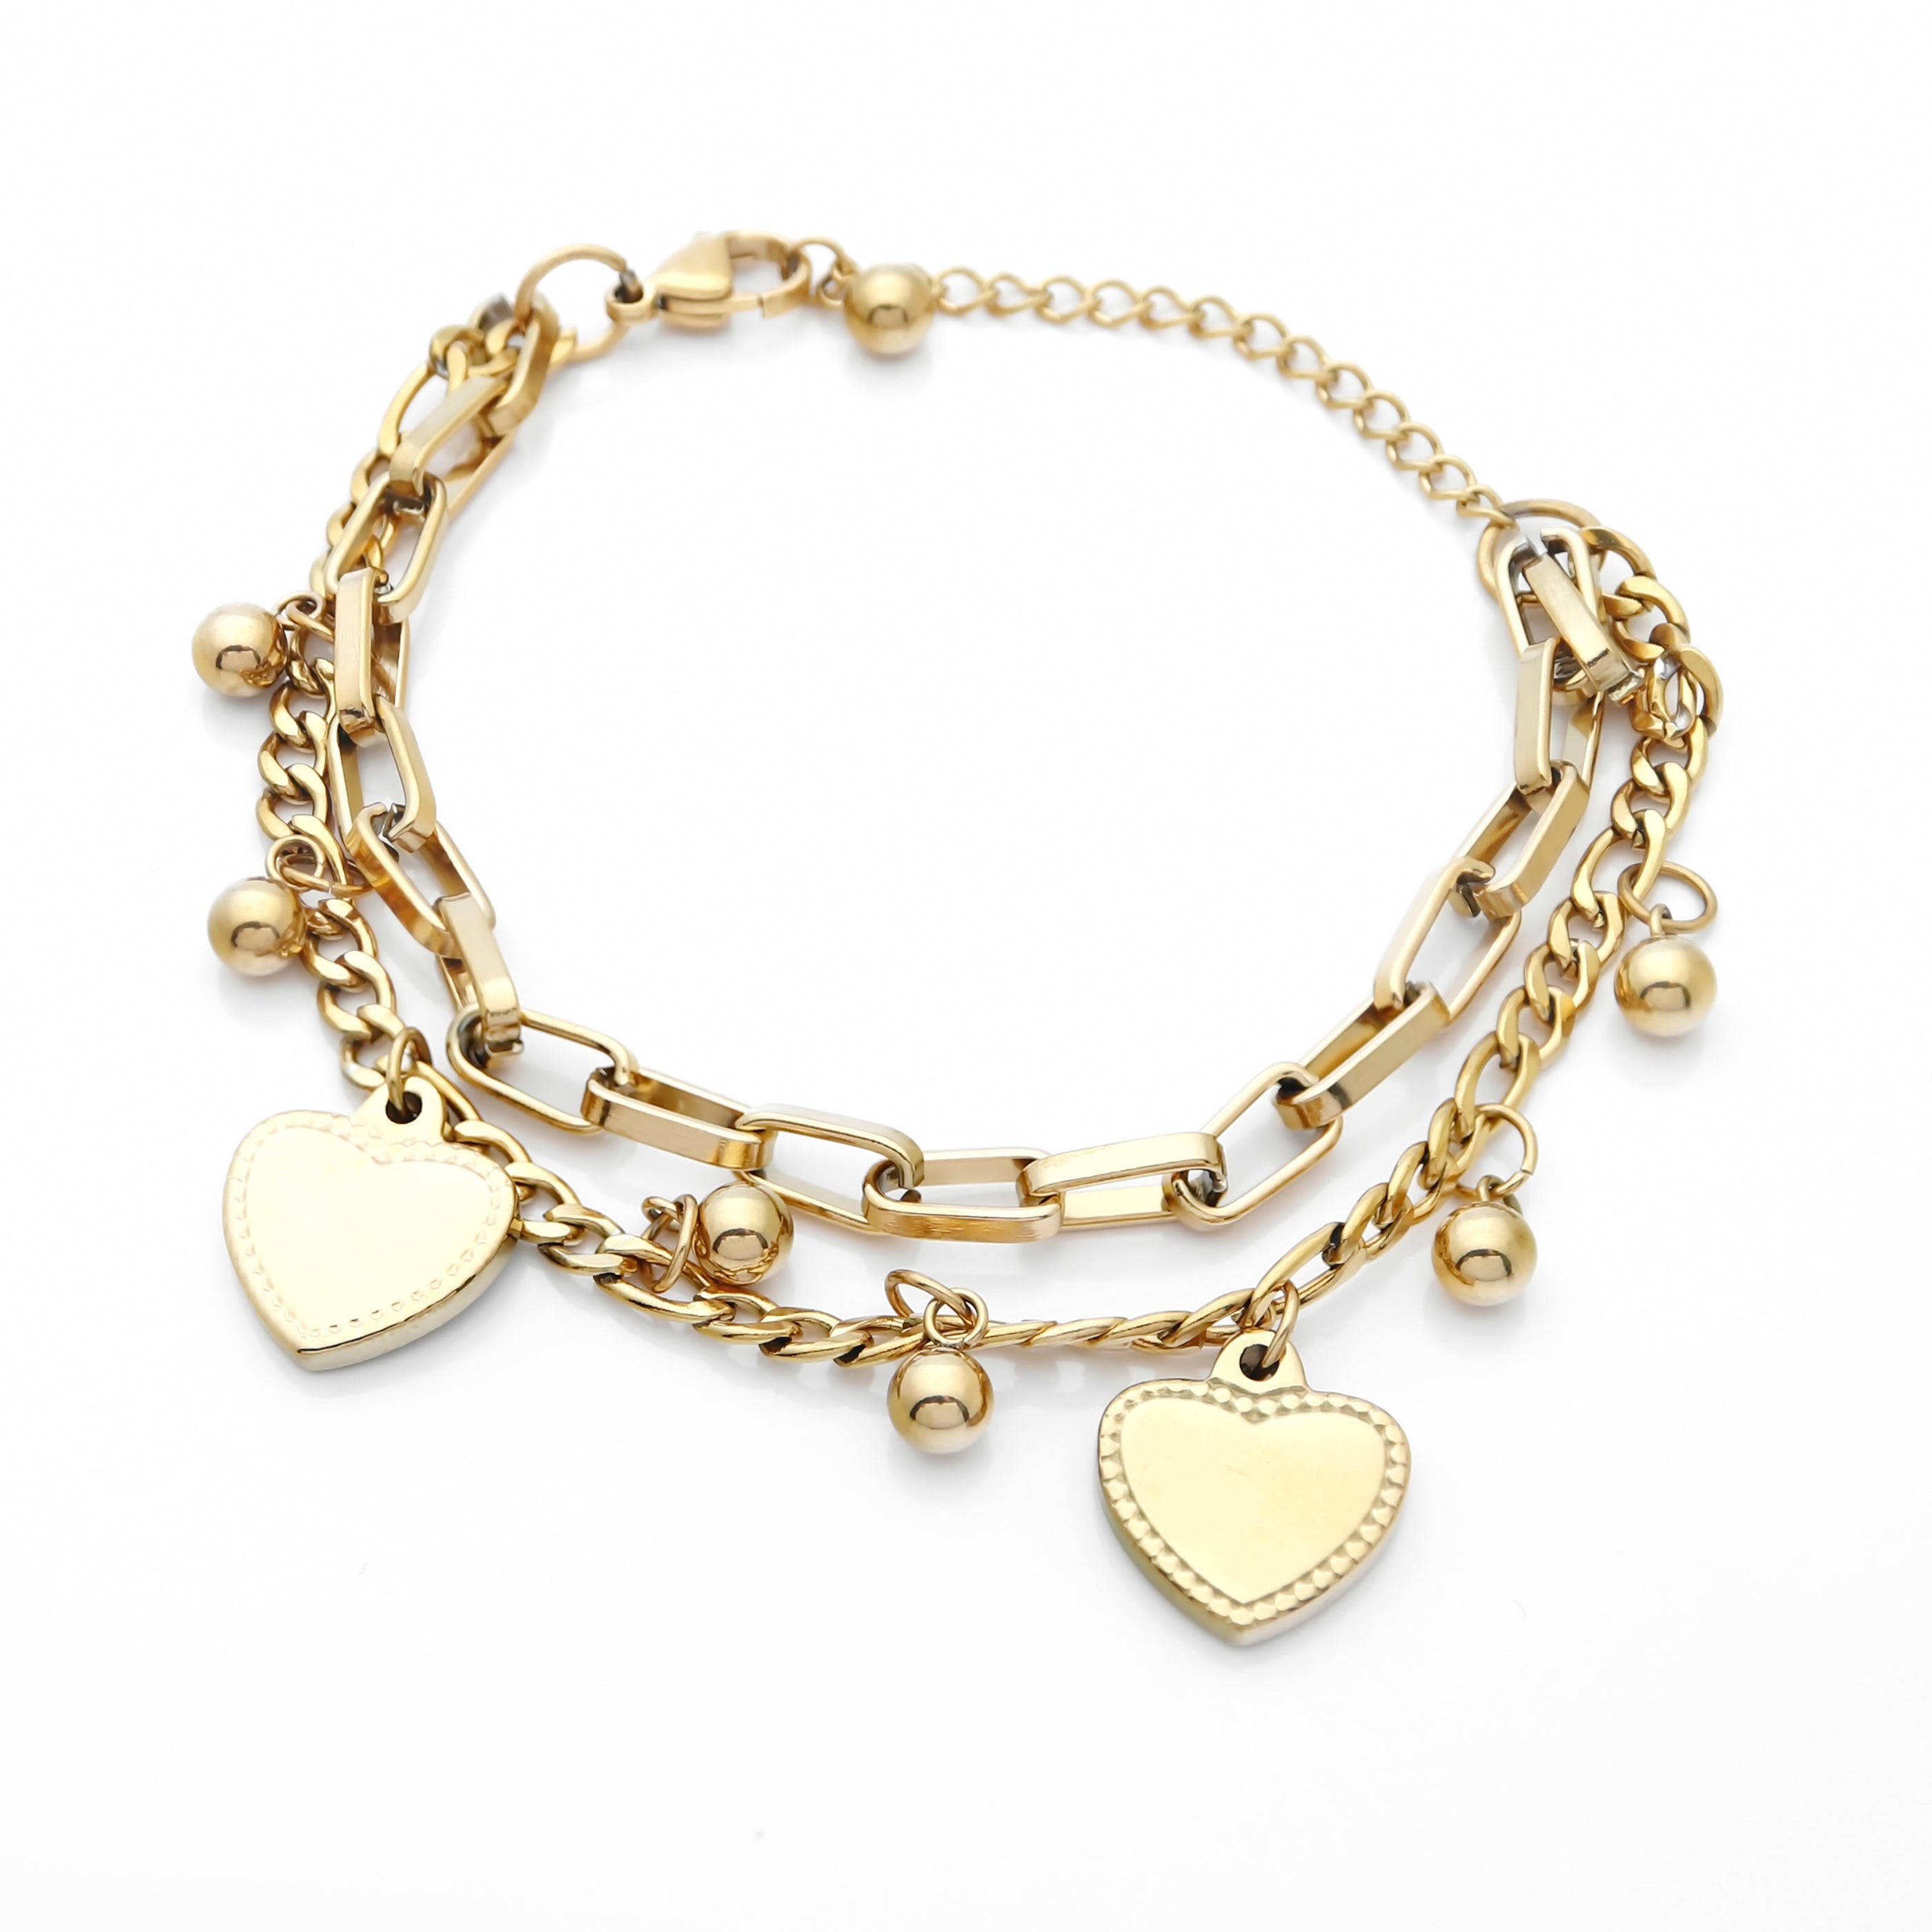 Double Layered Women's Bracelet with Dangle Heart Charms - Gold-Bracelets, Jewellery, Stainless Steel, Stainless Steel Bracelet, Women's Bracelet, Women's Jewellery-sb0074-g-1-Glitters